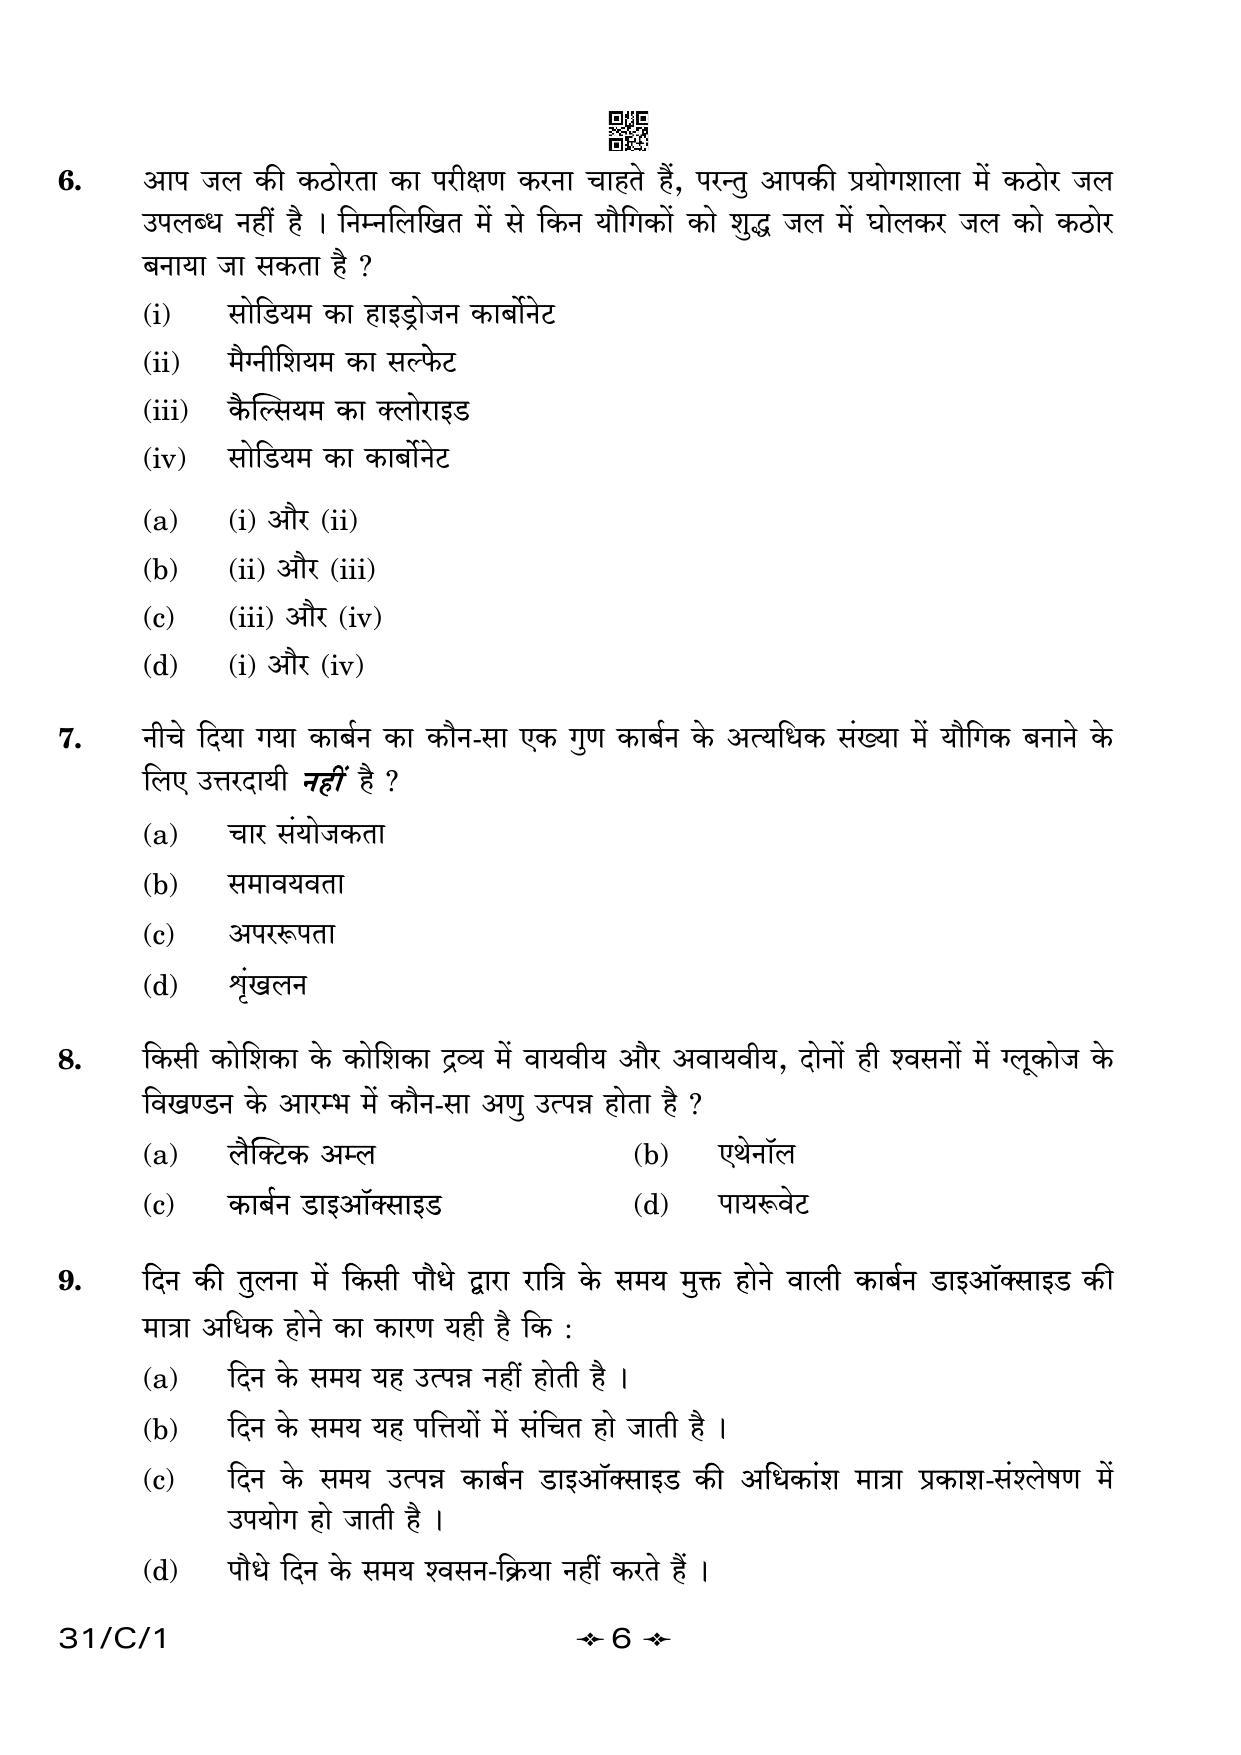 CBSE Class 10 31-1 Science 2023 (Compartment) Question Paper - Page 6